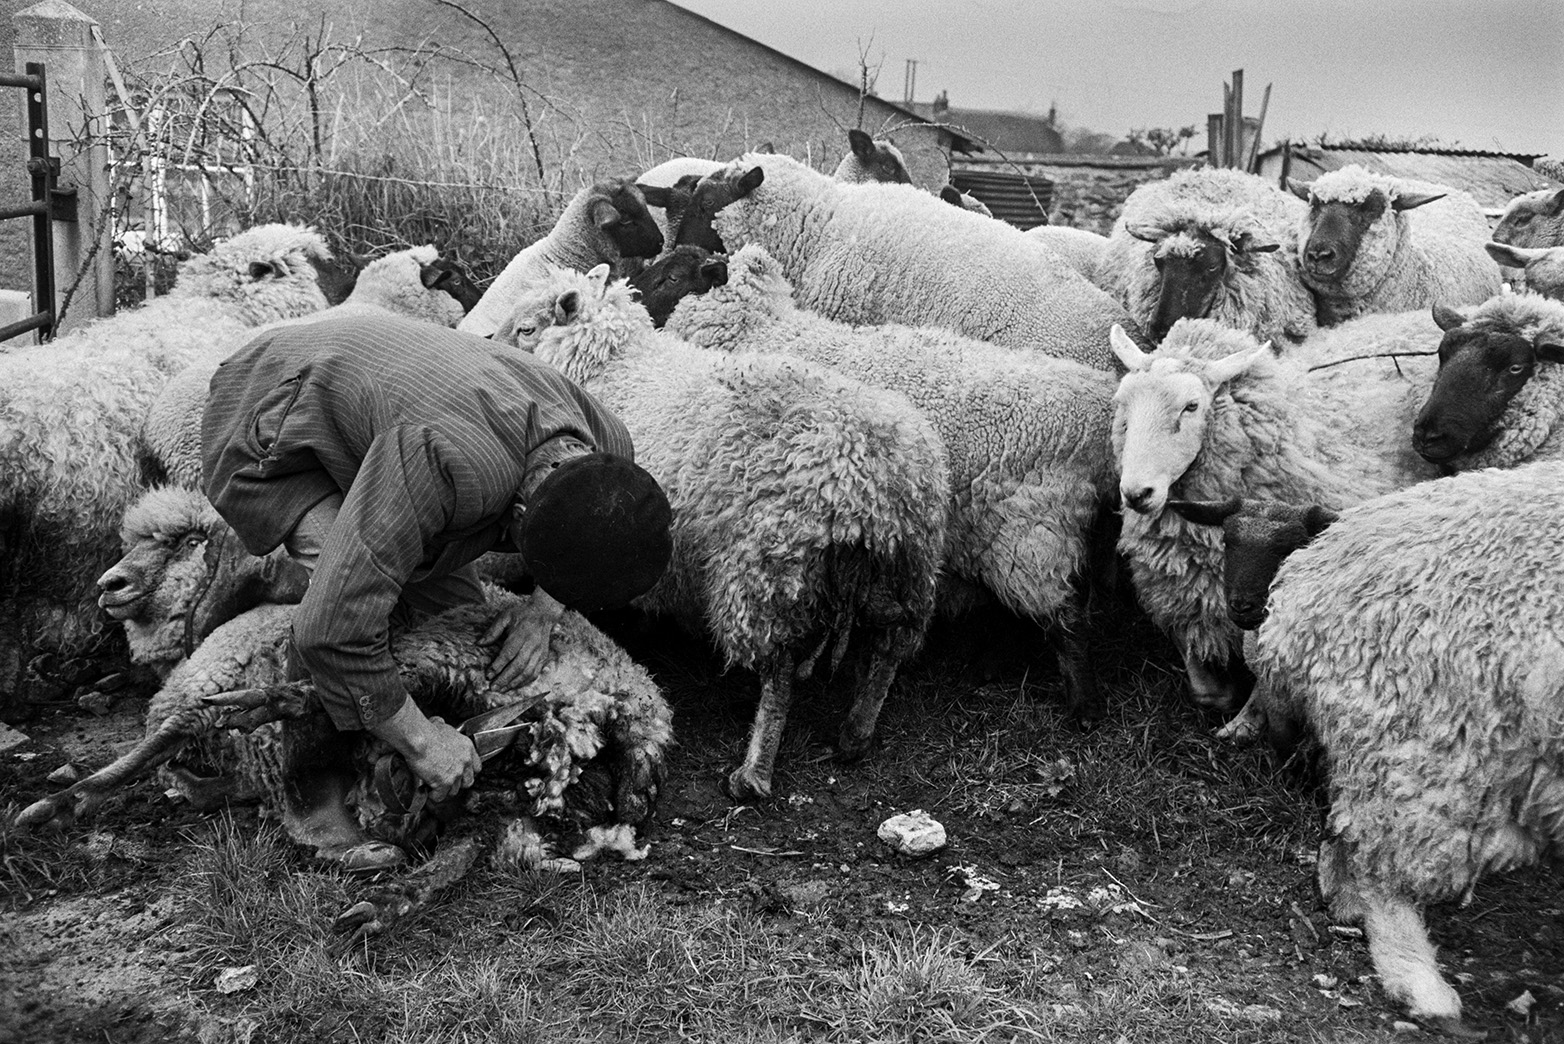 Ivor Bourne docking sheep by trimming wool around their bottoms, in a field at Mill Road Farm, Beaford. Farm buildings can be seen in the background. The farm was also known as Jeffrys.